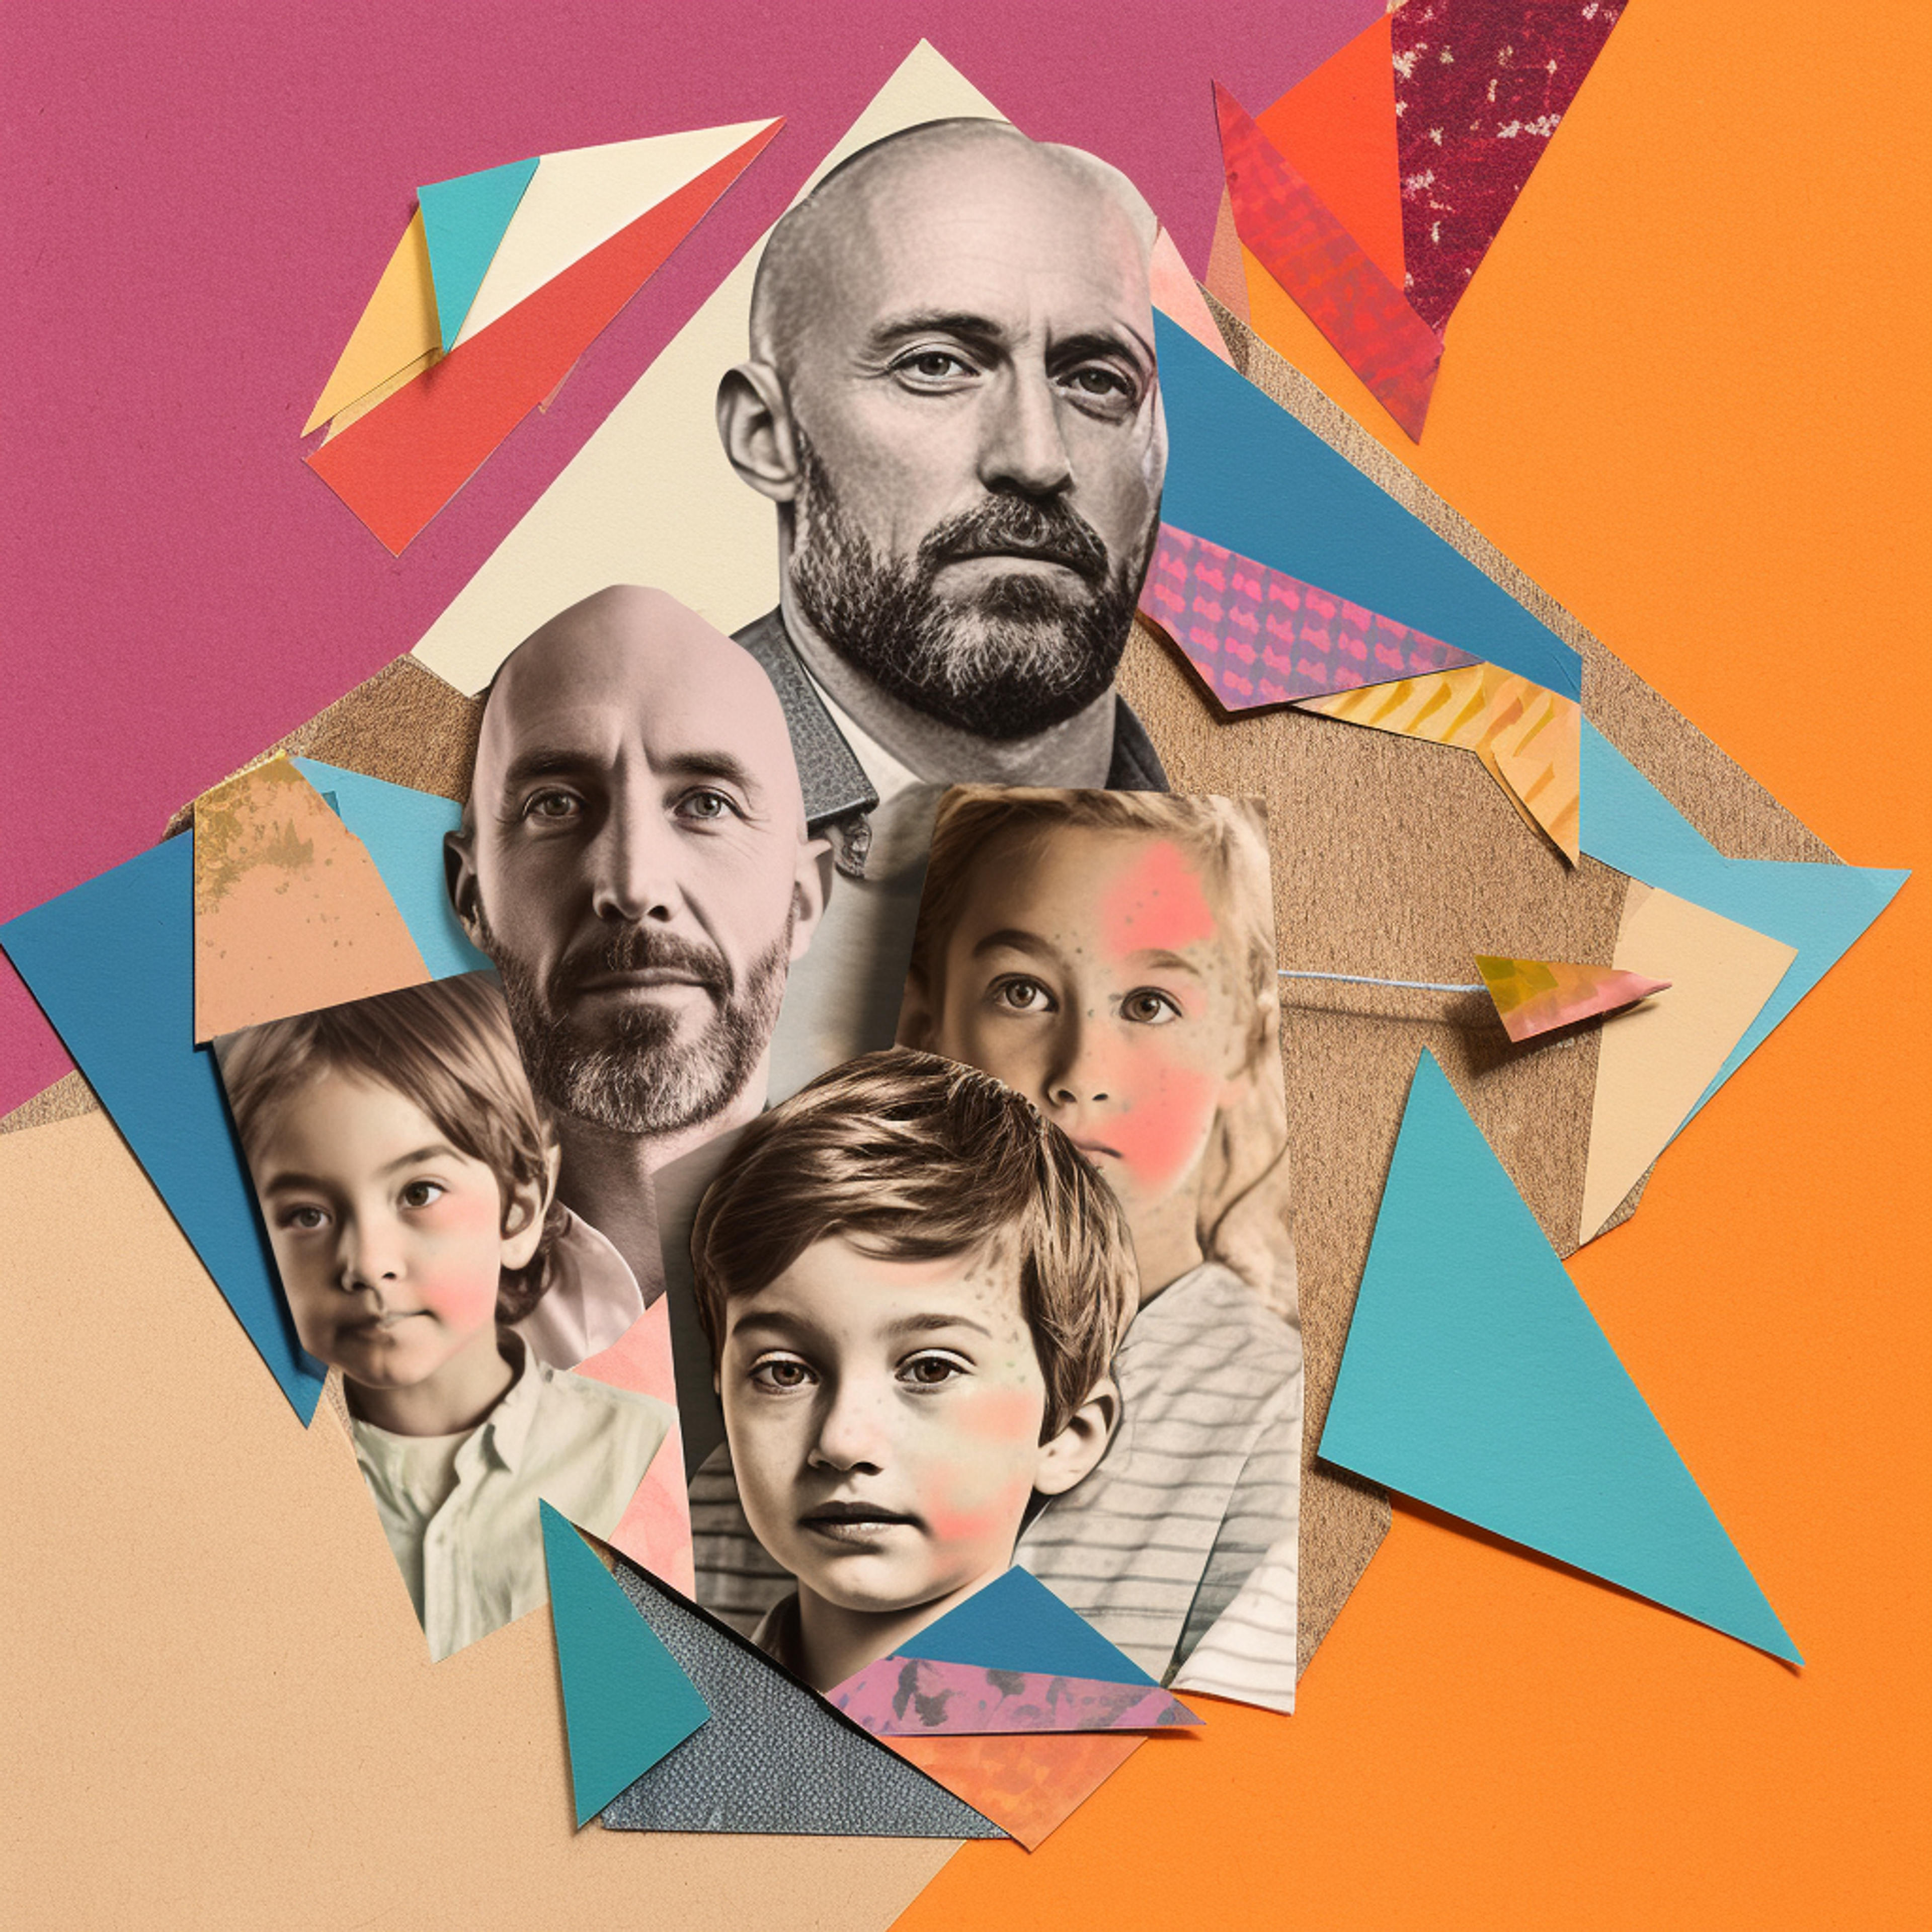 KIDS SATURDAYS: COLLAGE PORTRAITS - The Polygon Gallery